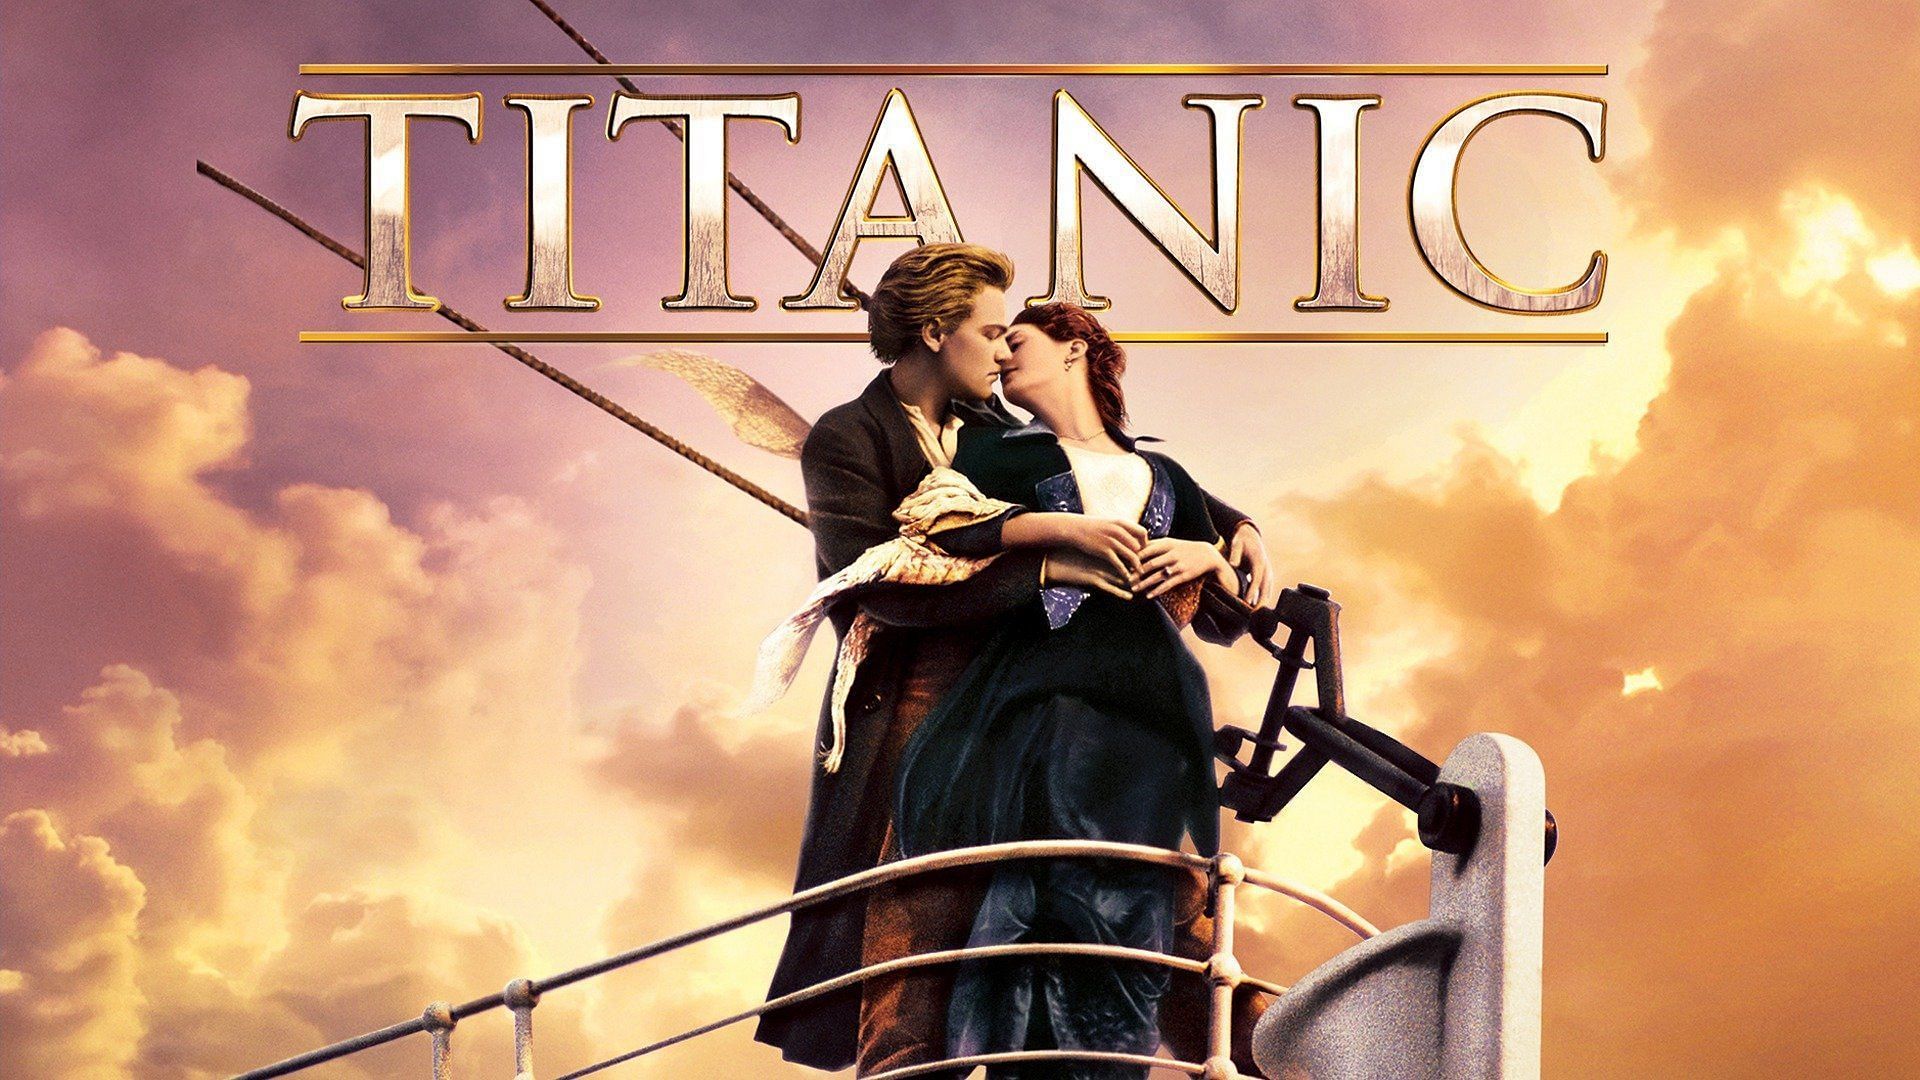 A poster for Titanic (Image Via Rotten Tomatoes)